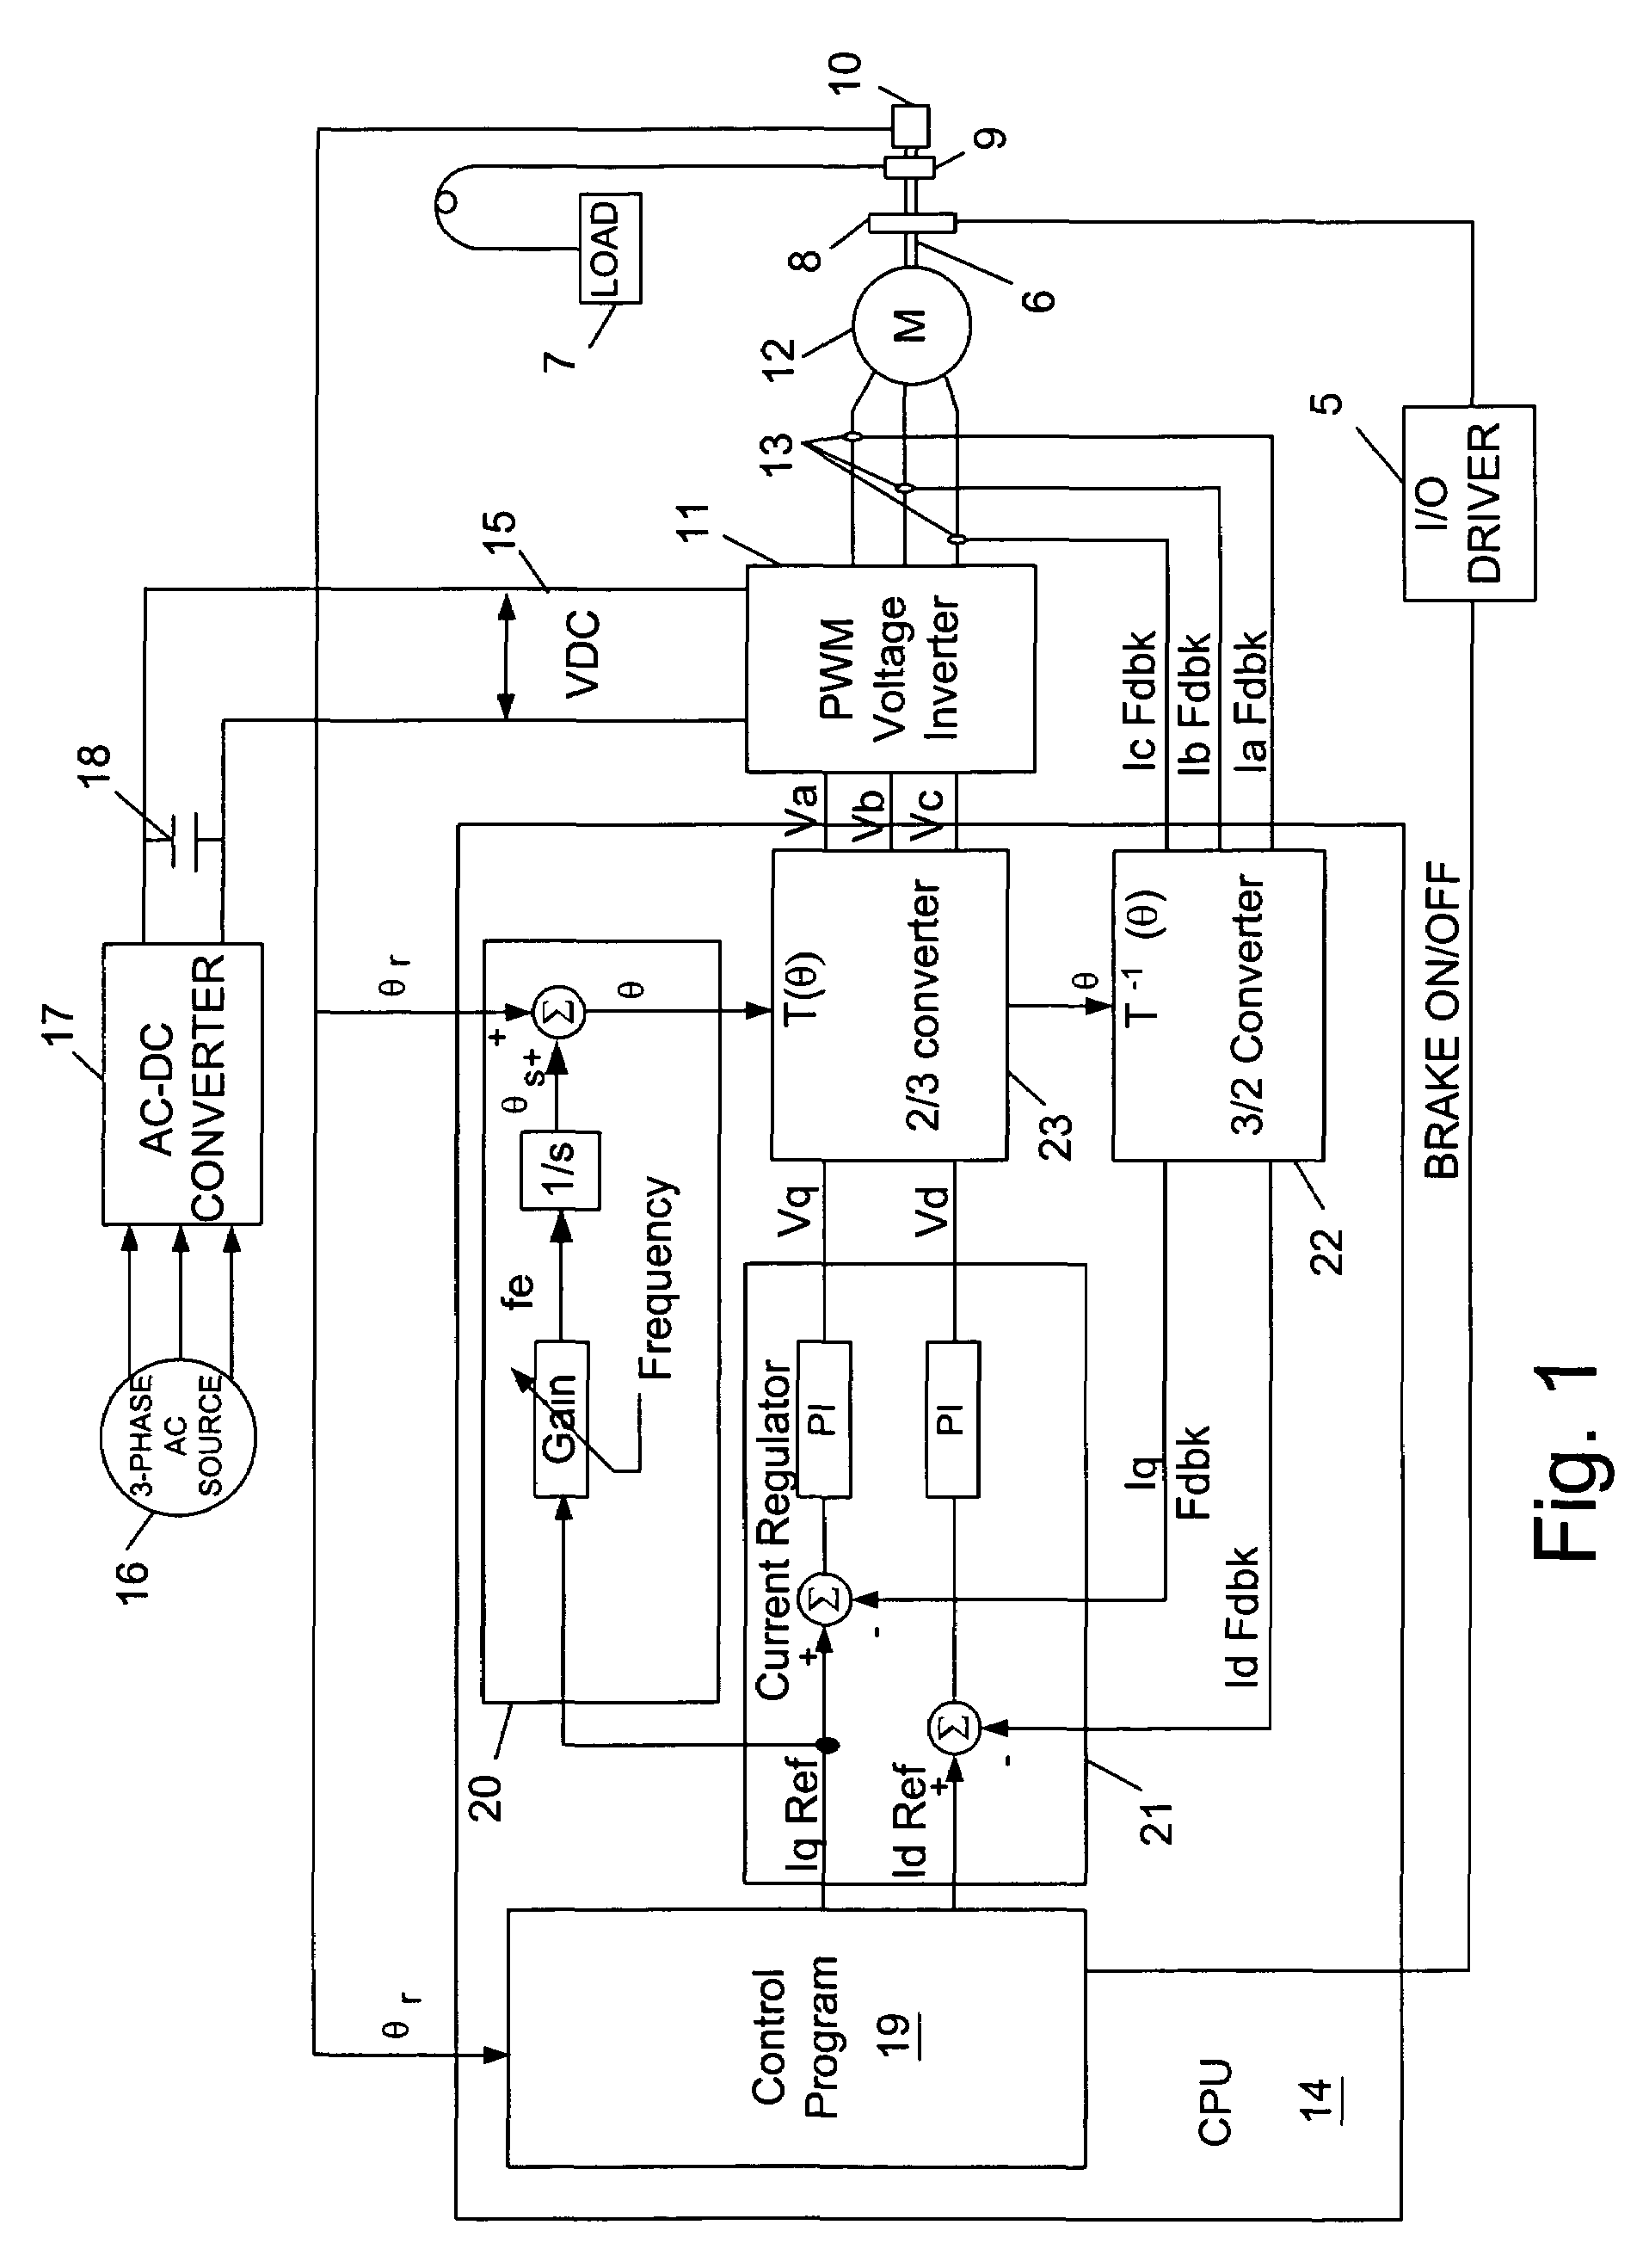 Motor control for stopping a load and detecting mechanical brake slippage